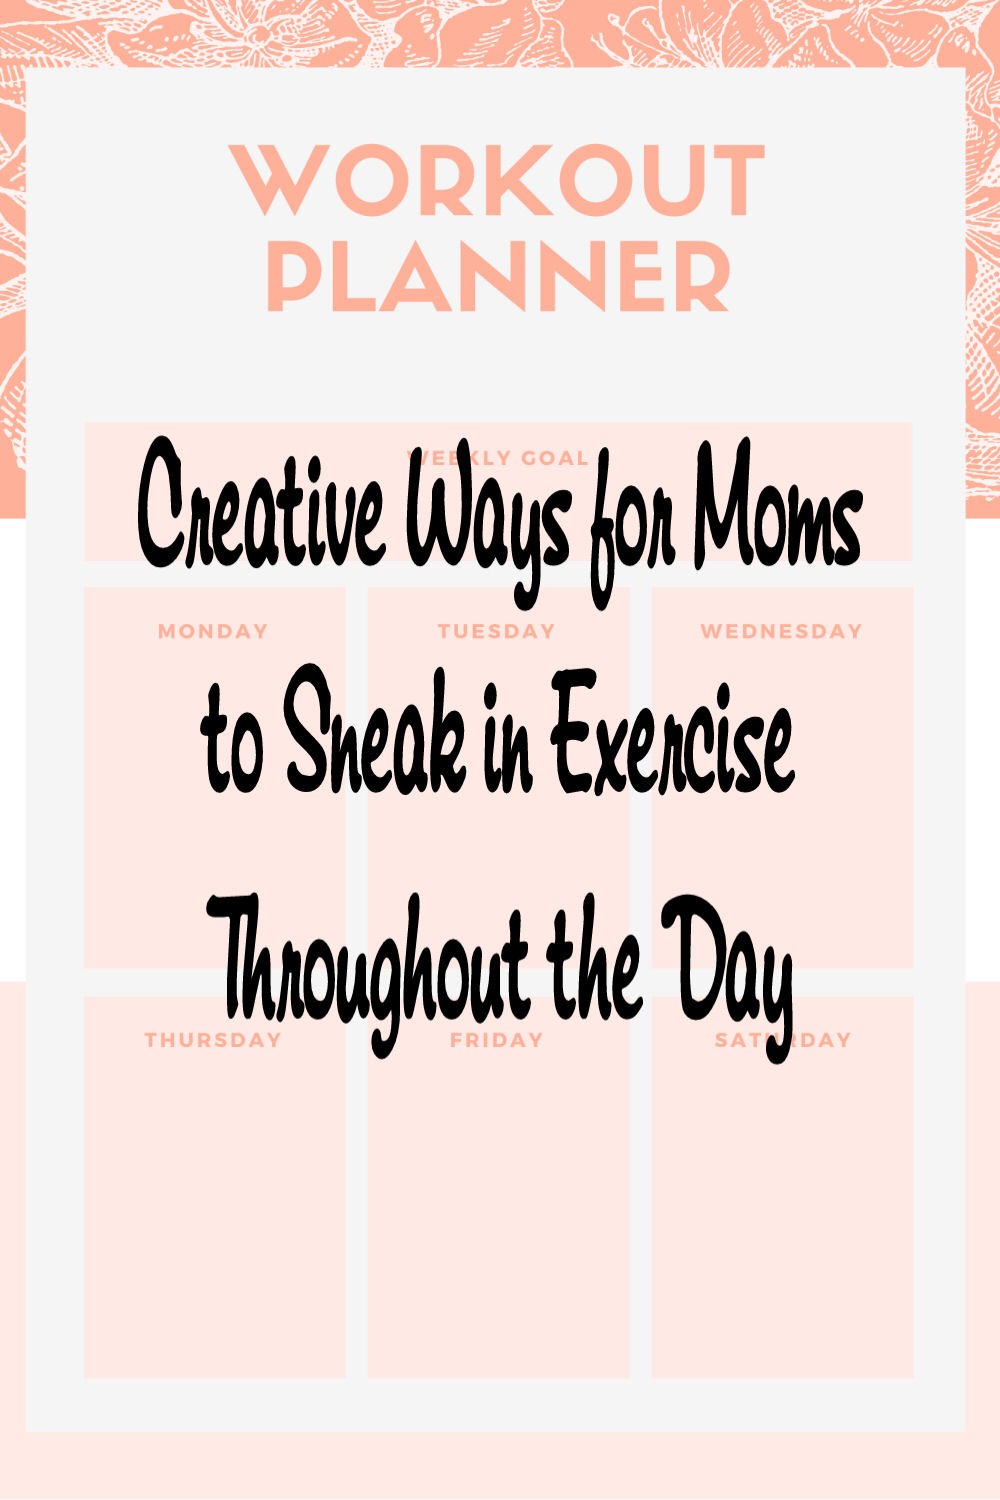 Creative Ways for Moms to Sneak in Exercise Throughout the Day